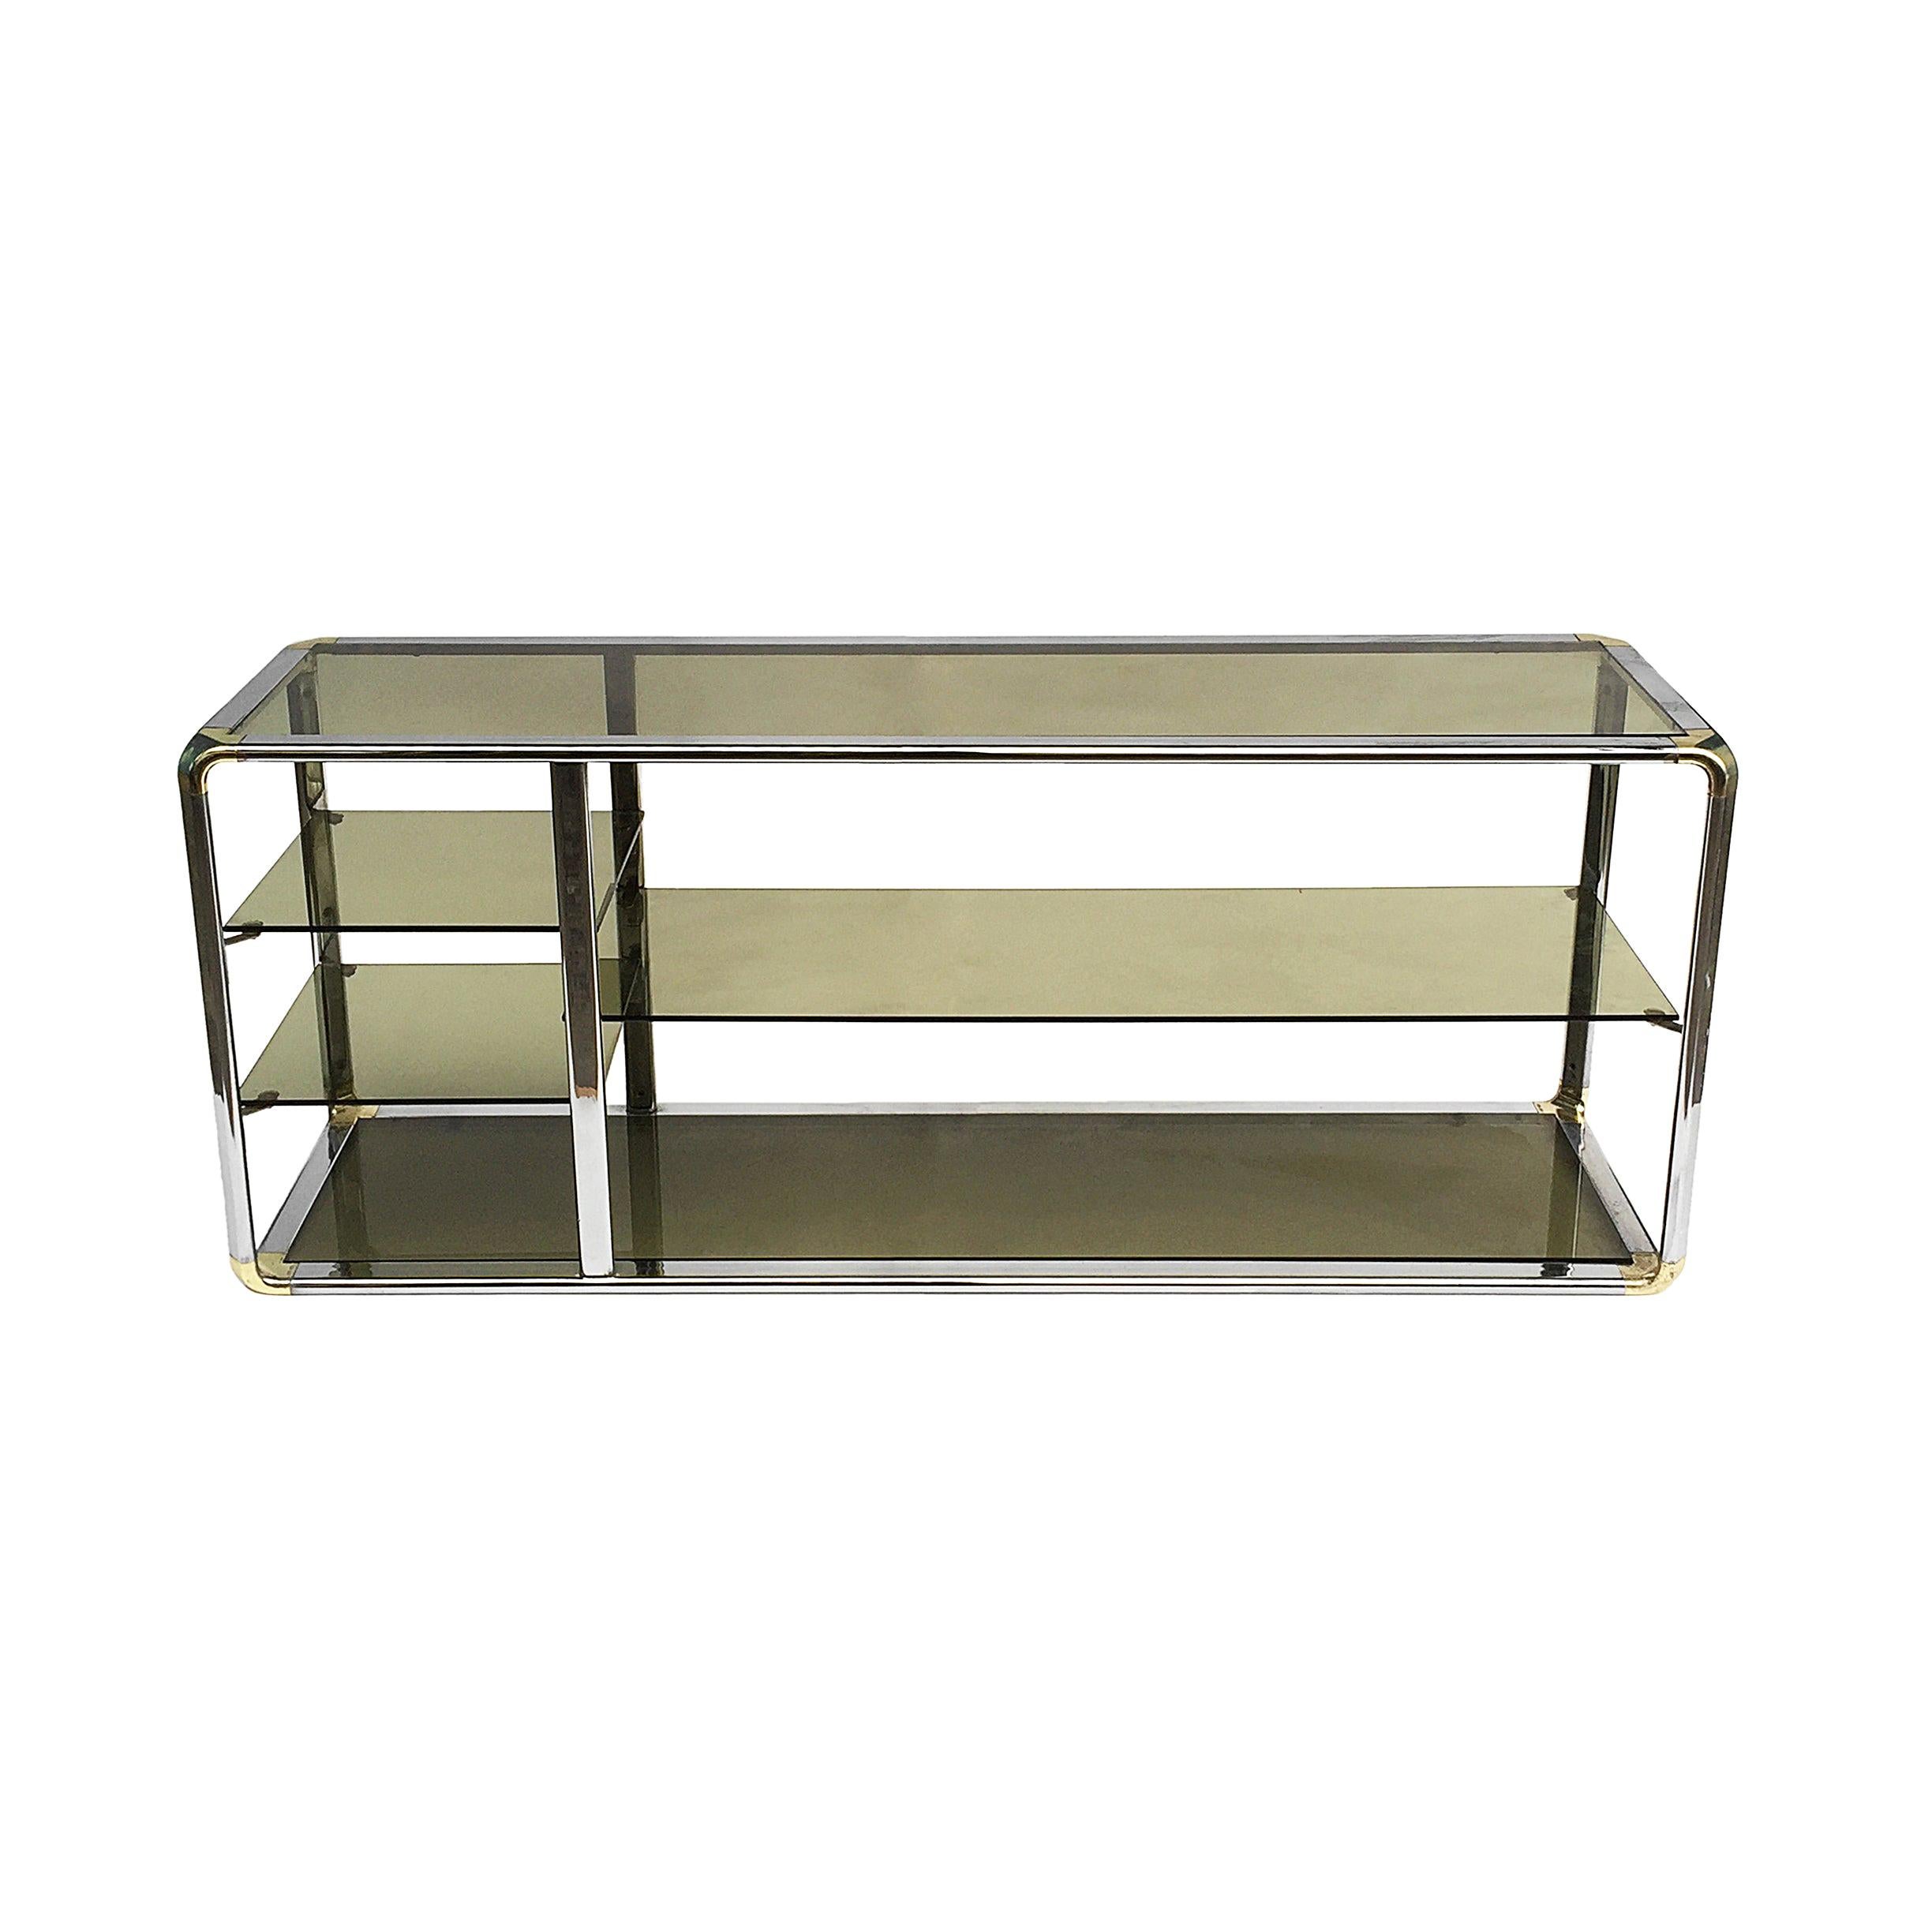 Chrome And Glass Sound System Display Shelving Etagere Unit Vintage Midcentury